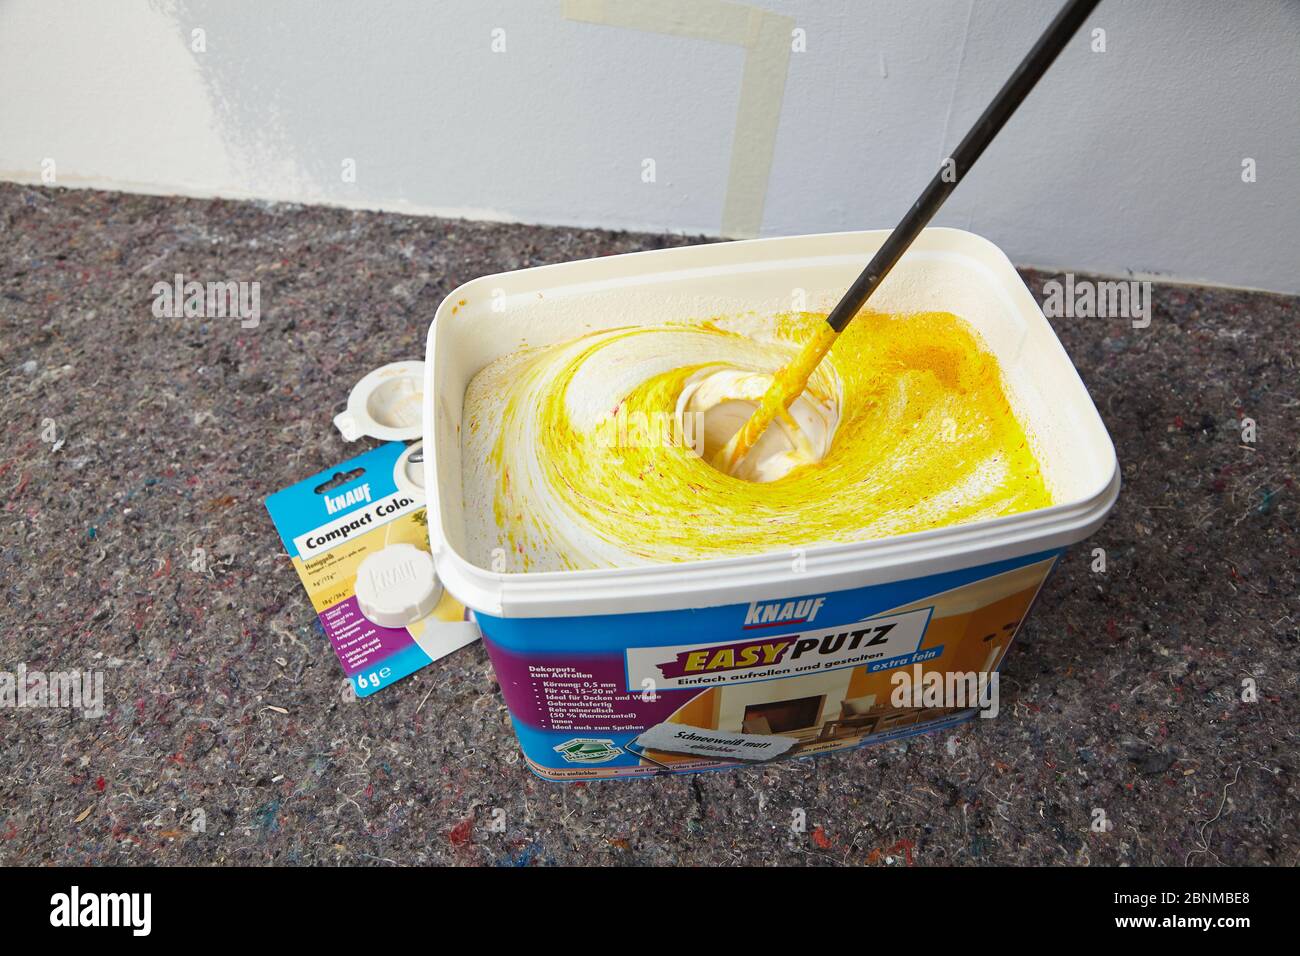 DIY wall design 03, step-by-step do-it-yourself production, various colored areas with wall paint and roller plaster, gray and yellow, step 3: stirring up the plaster and tinting with color pigments Stock Photo